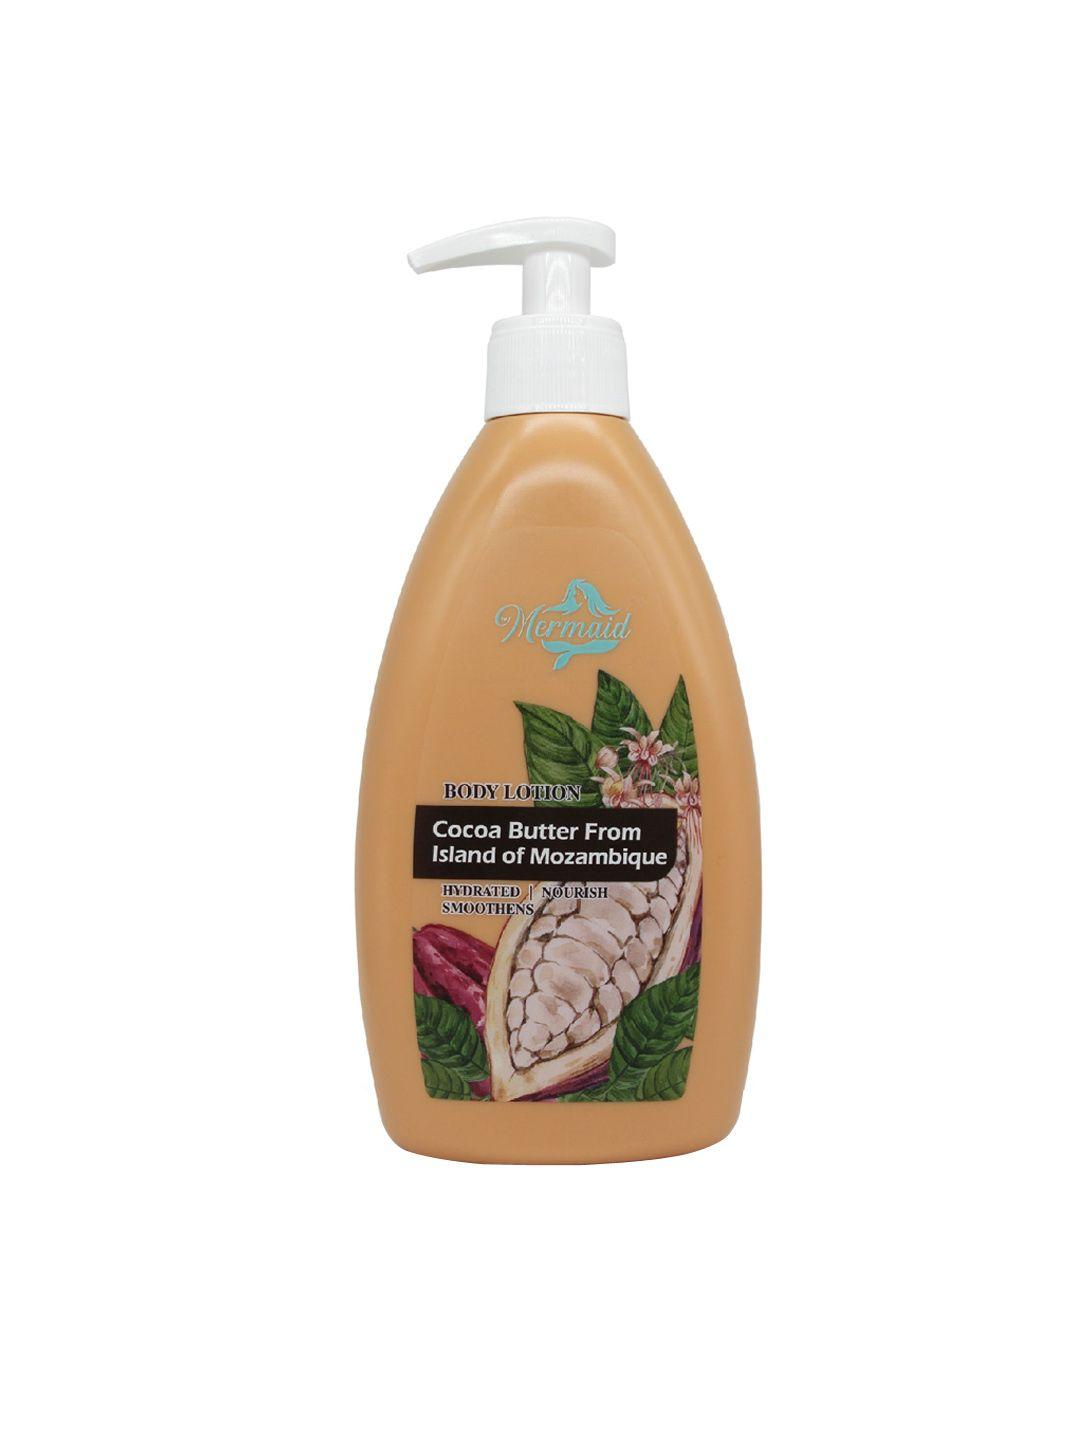 mermaid islands of mozambique cocoa butter body lotion 350ml